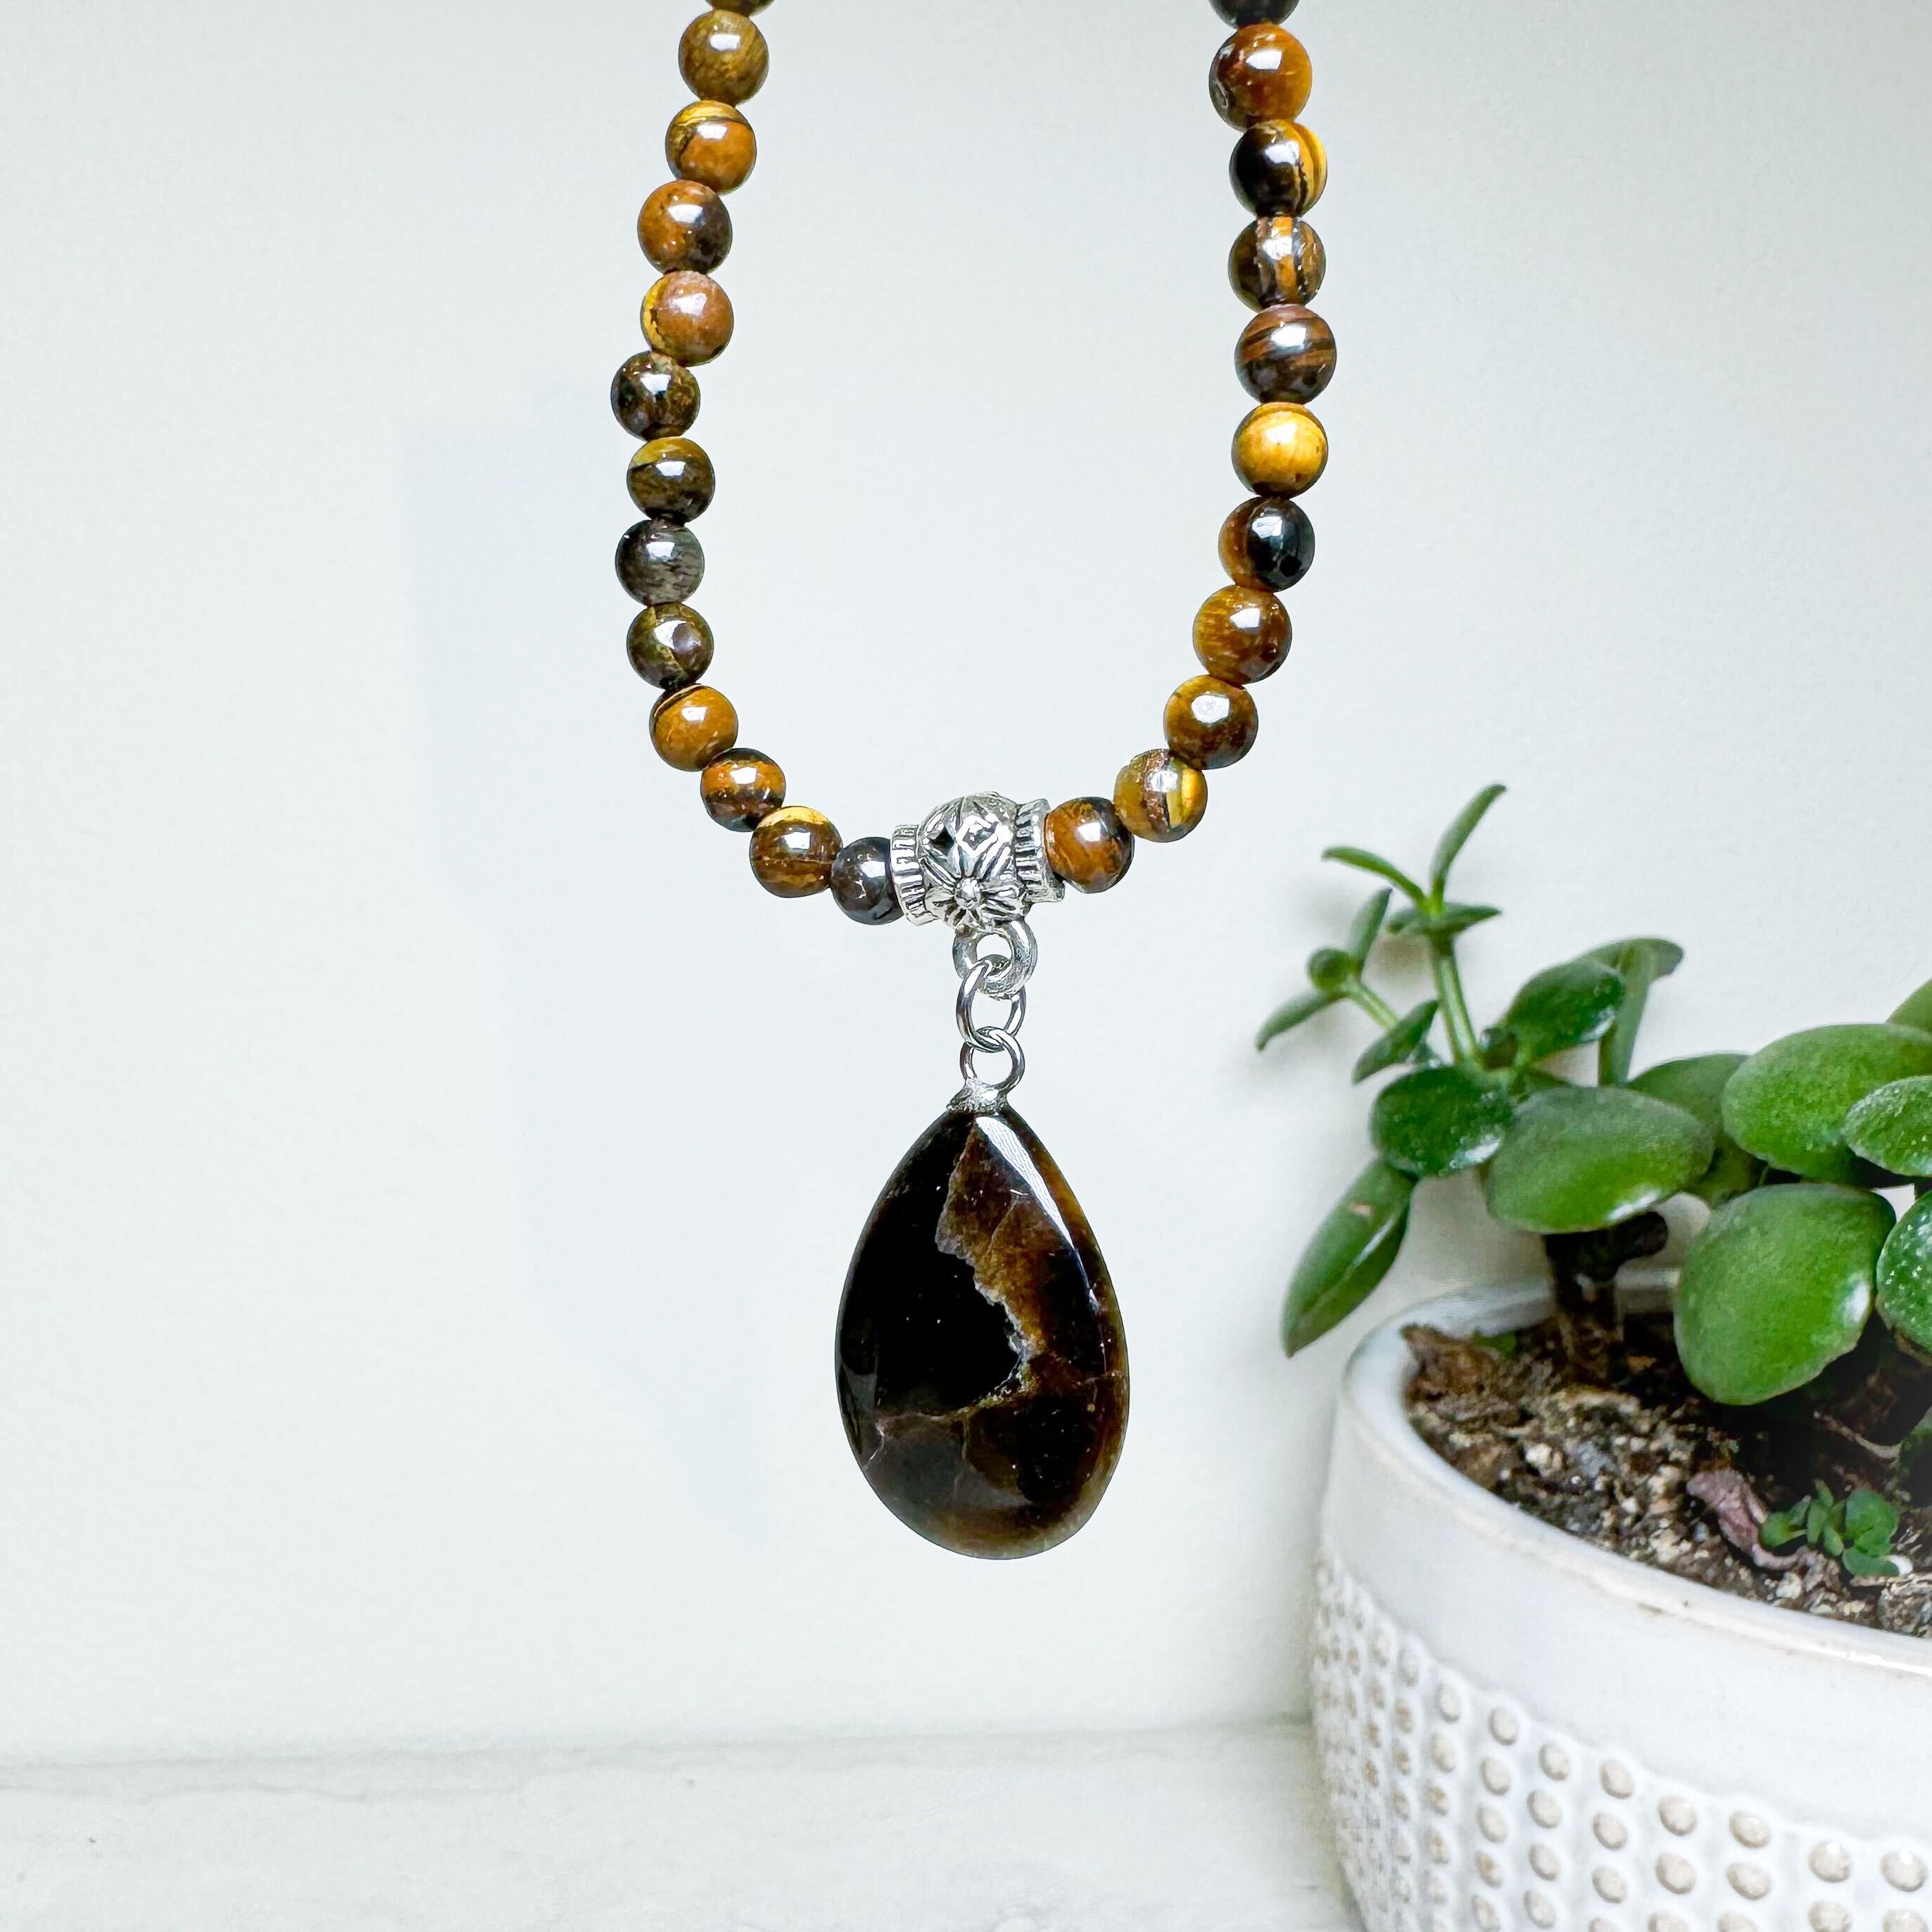 Beaded Crystal Necklace with Teardrop Pendant